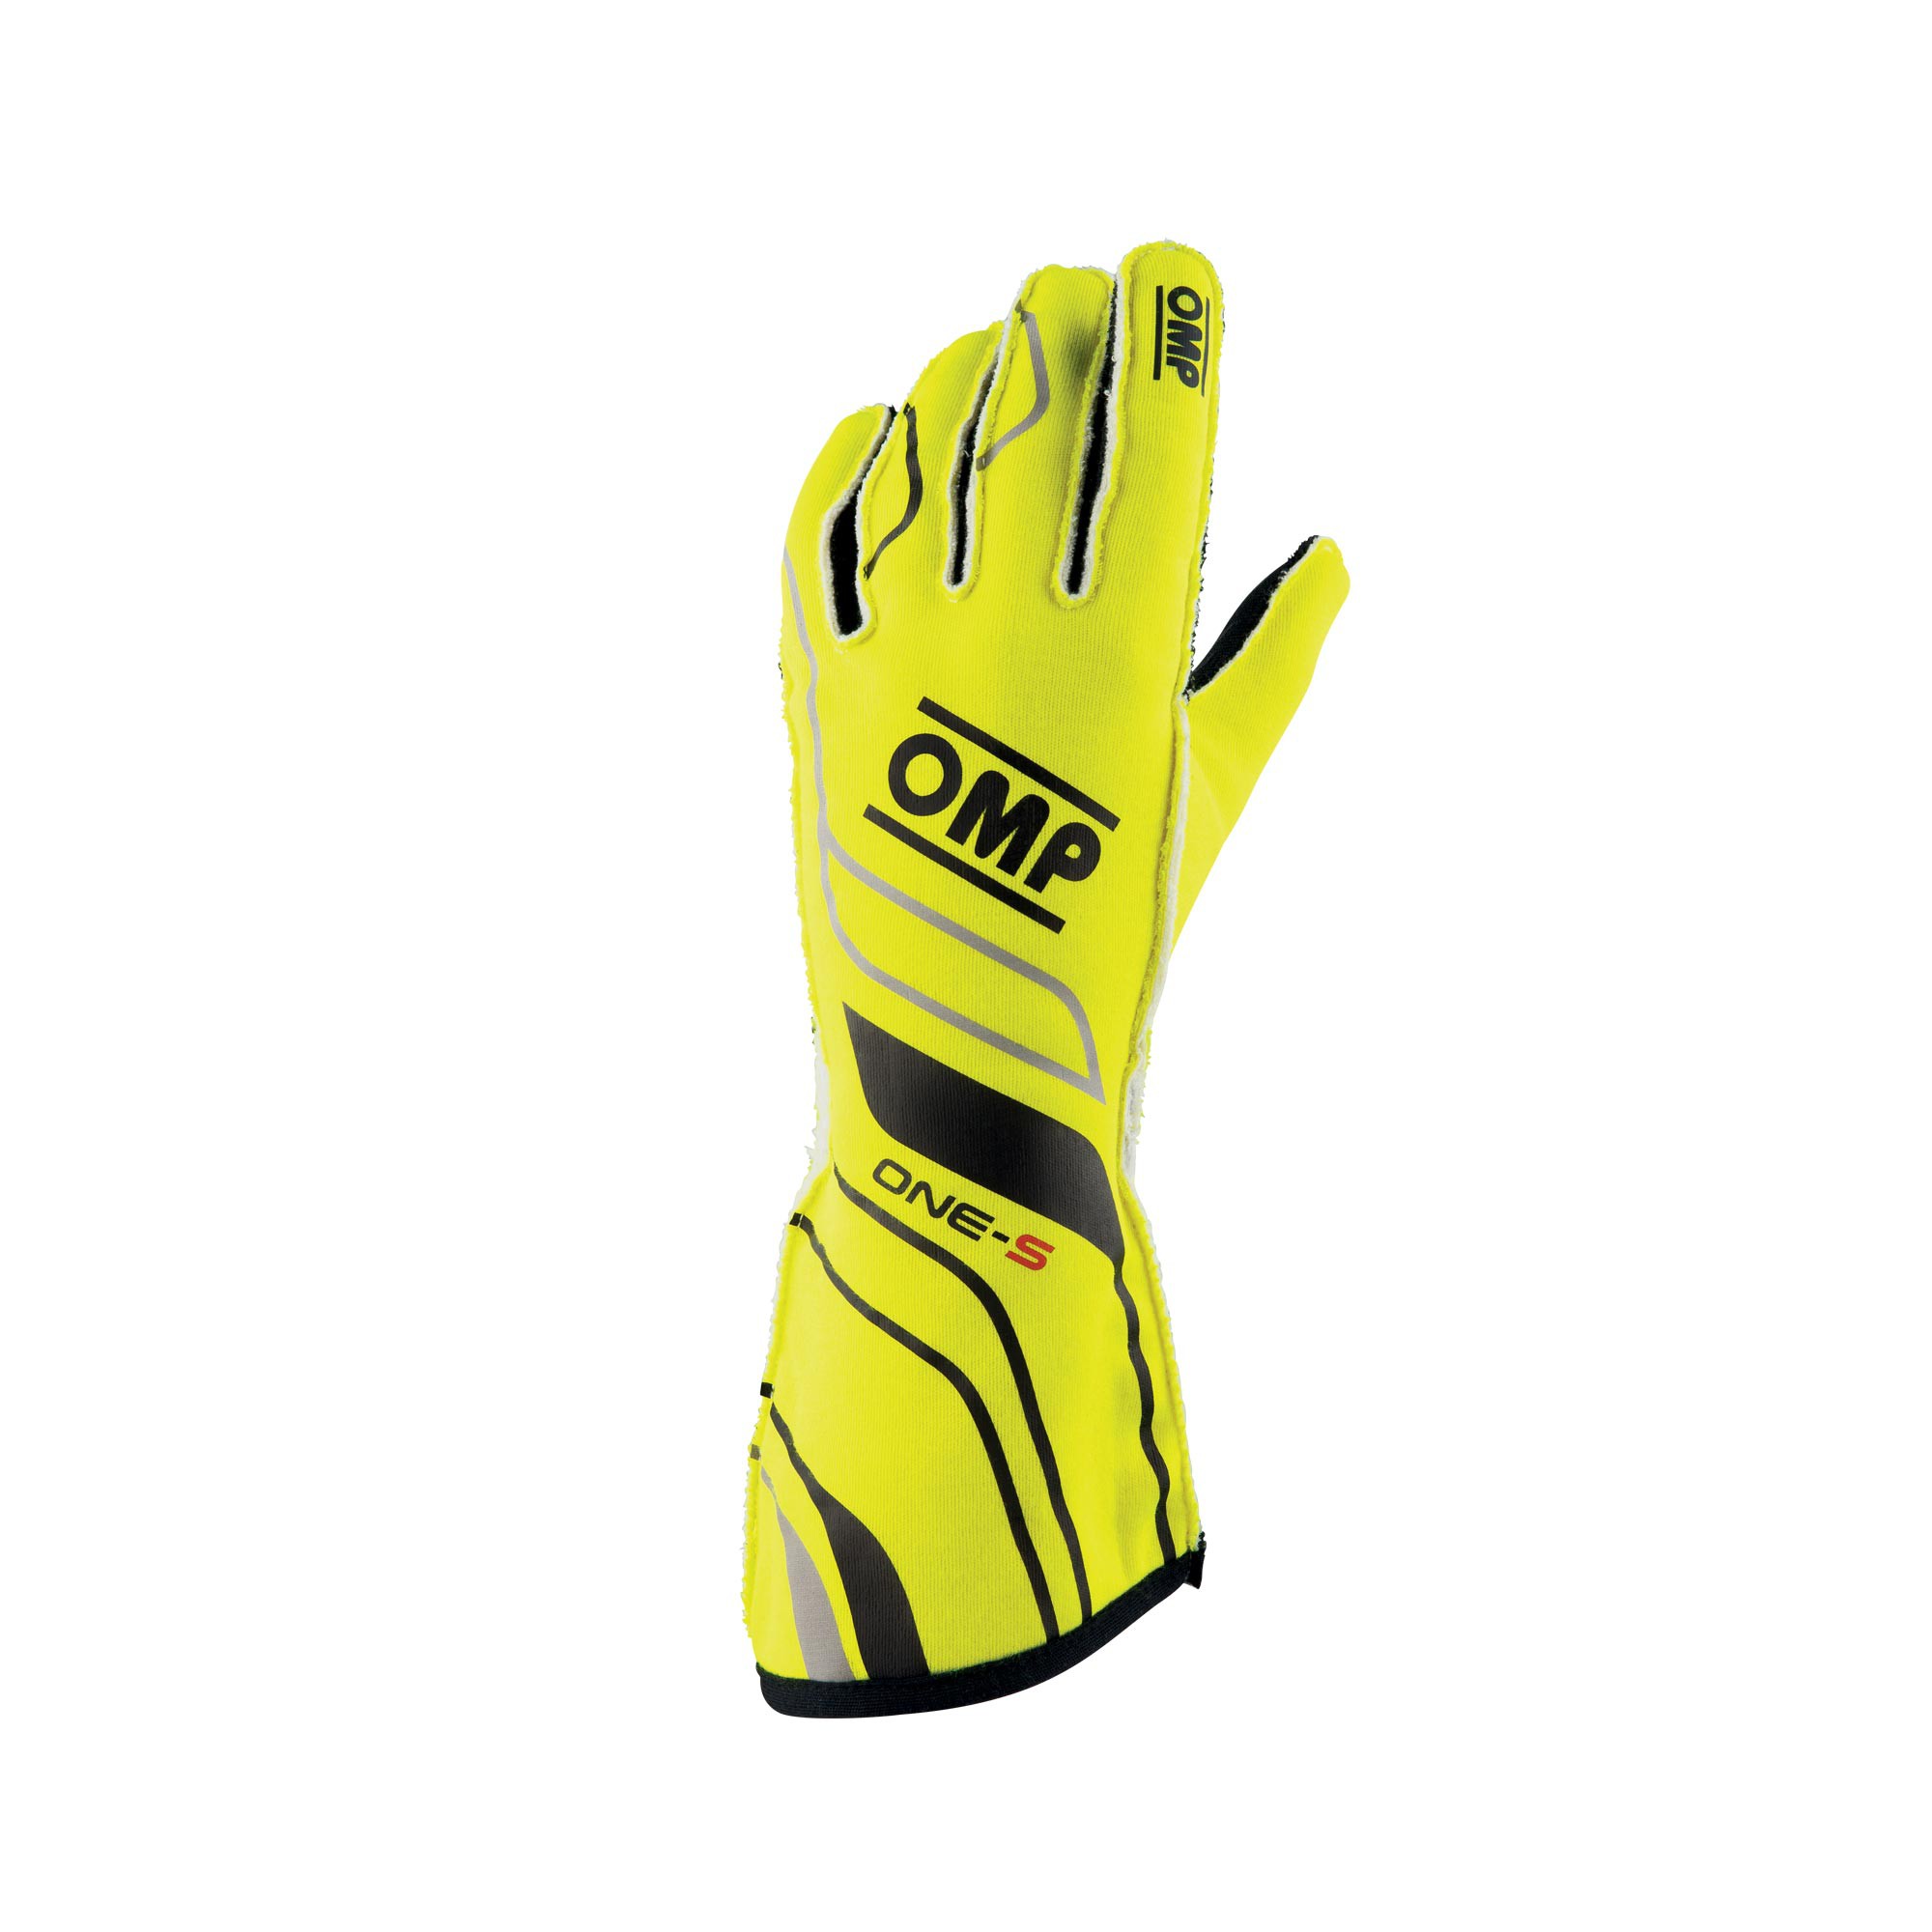 ONE-S GLOVES FLUO YELLOW SIZE L FIA 8556-2018